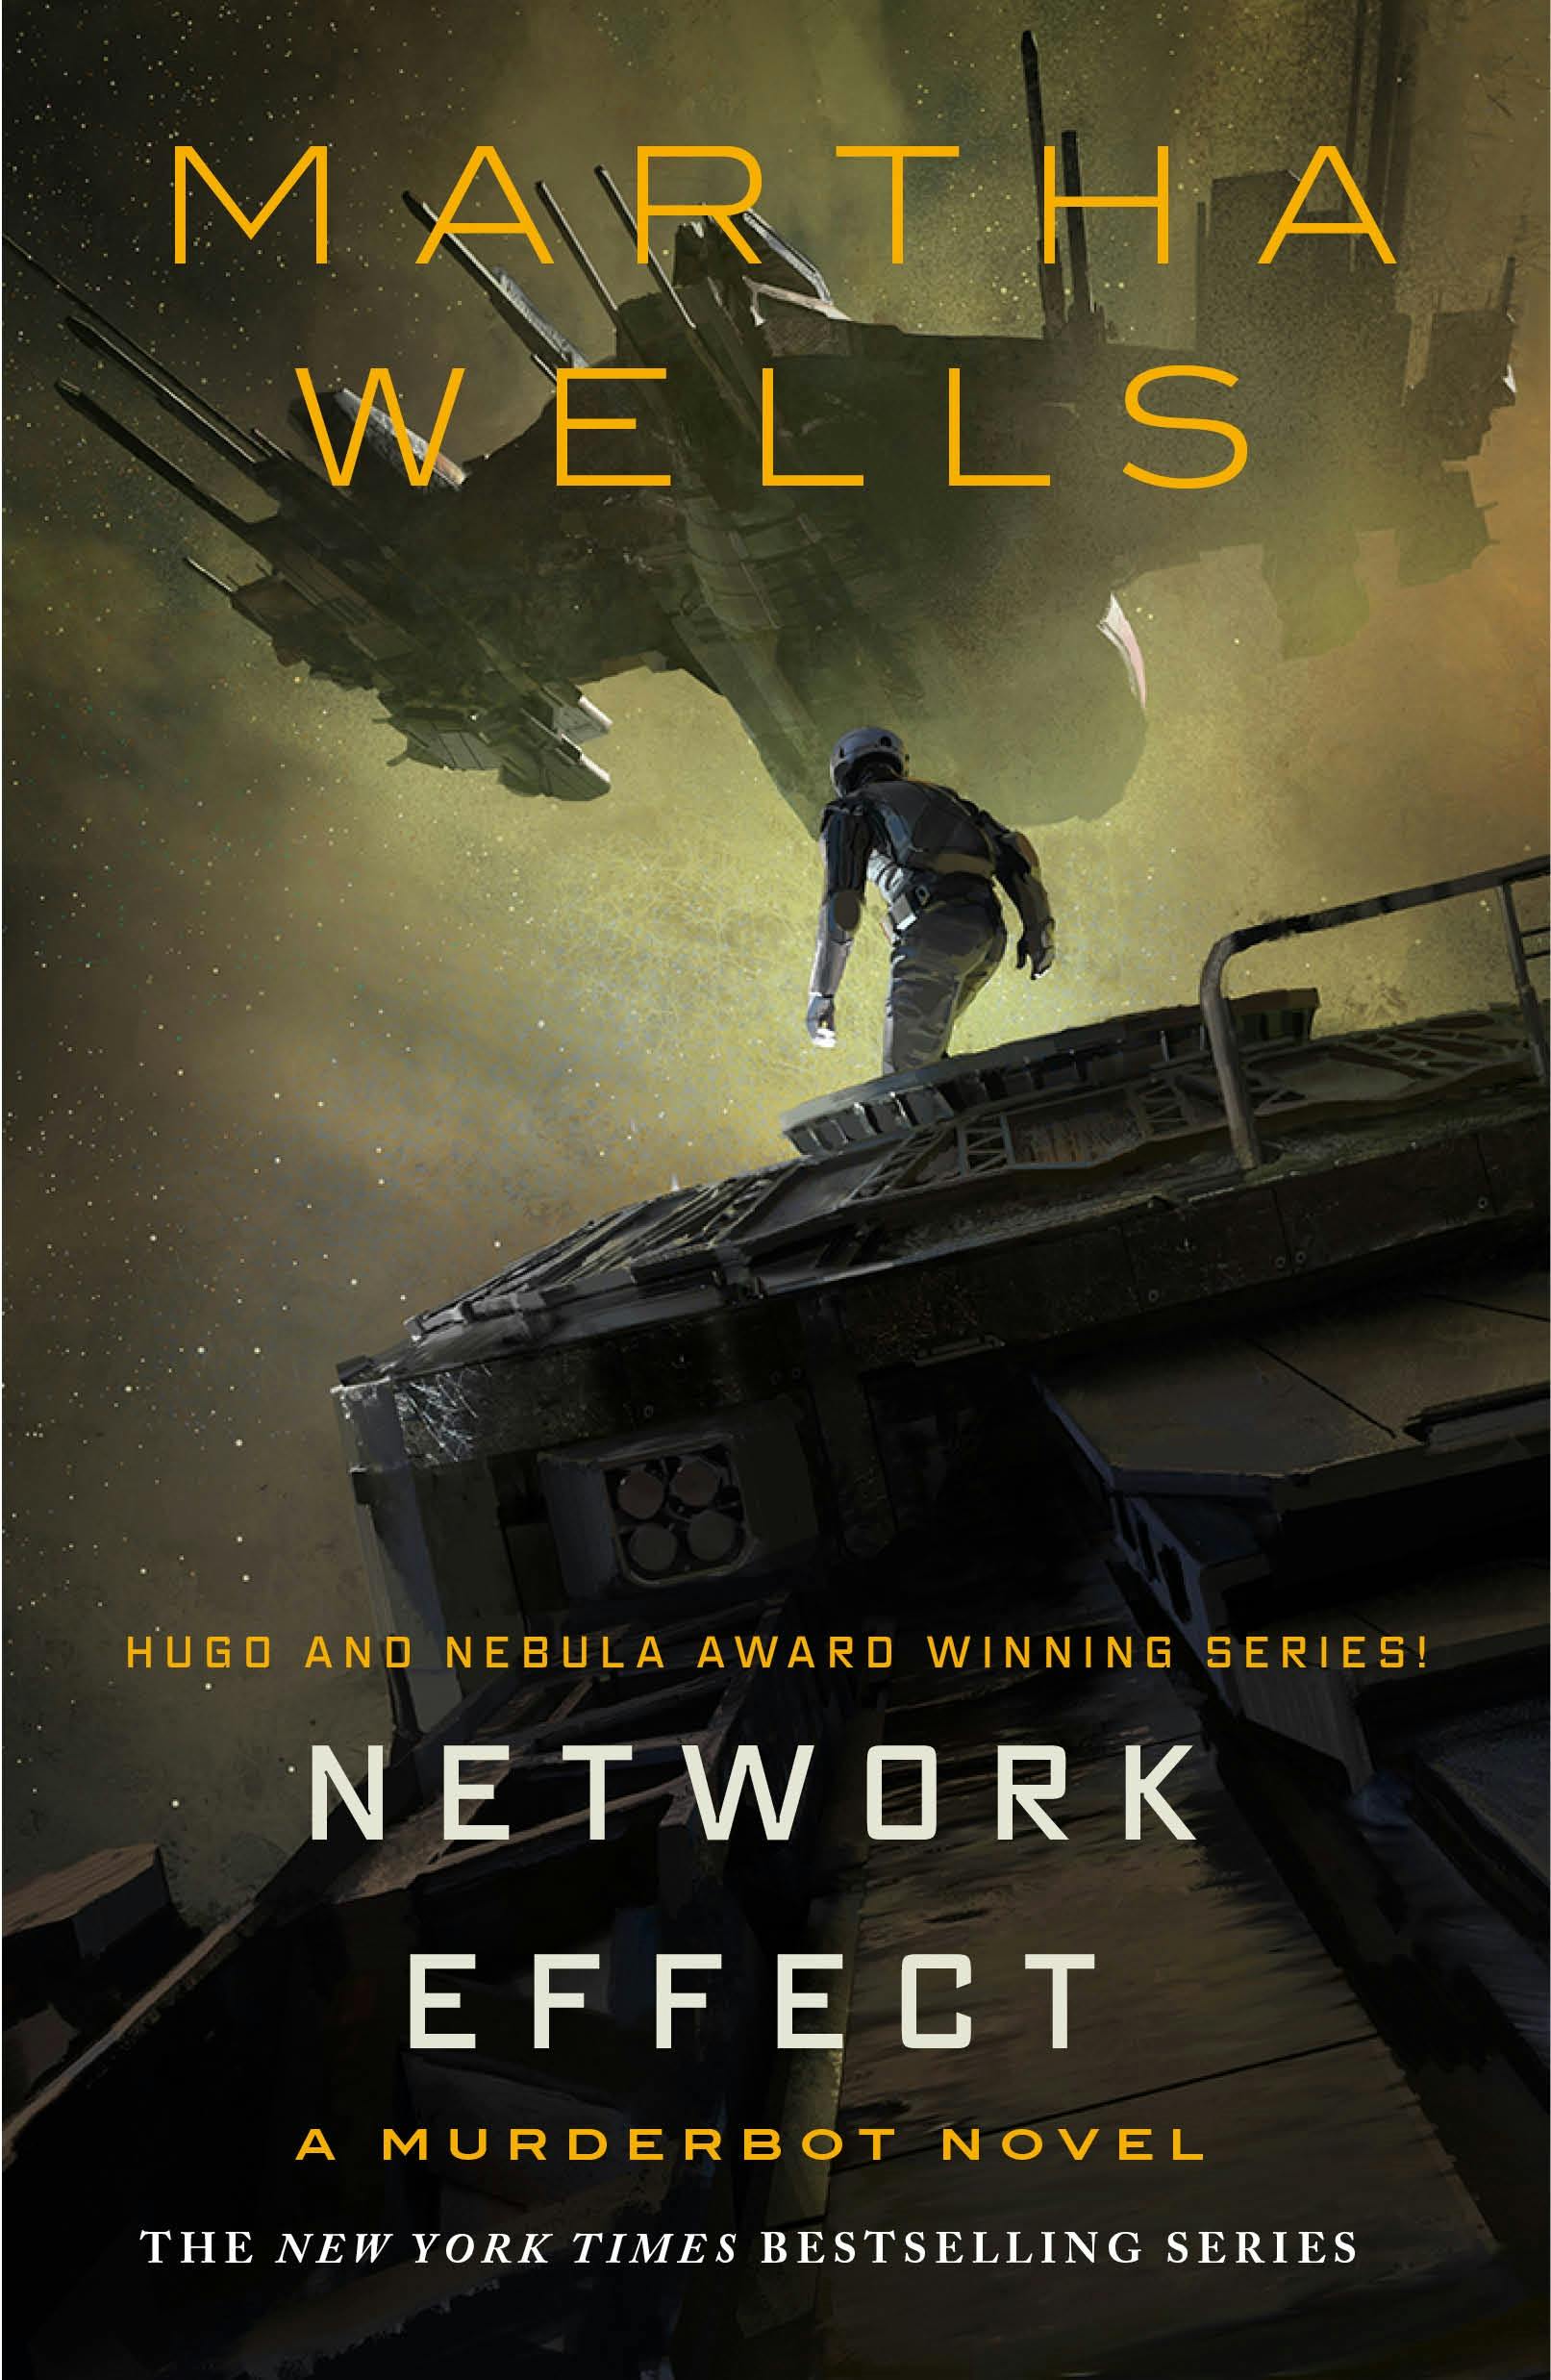 Cover for the book titled as: Network Effect